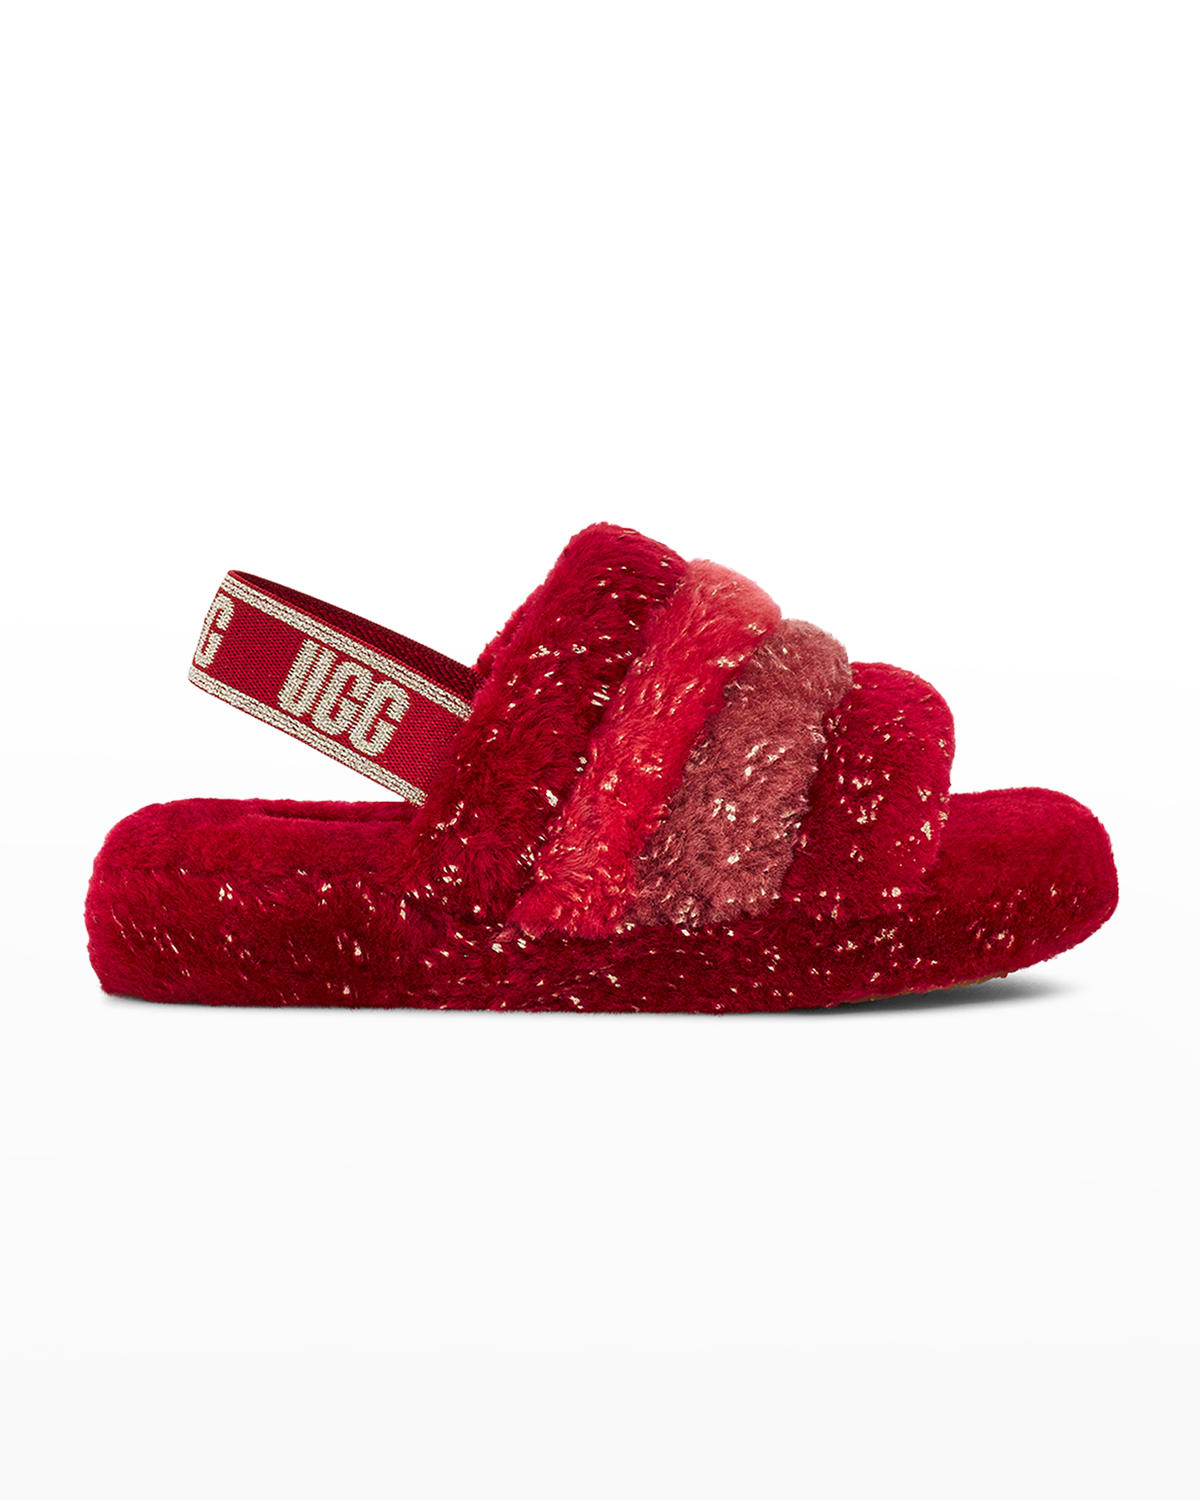 UGG GIRL'S FLUFF YEAH METALLIC SPARKLE QUILTED SLIPPERS, KIDS